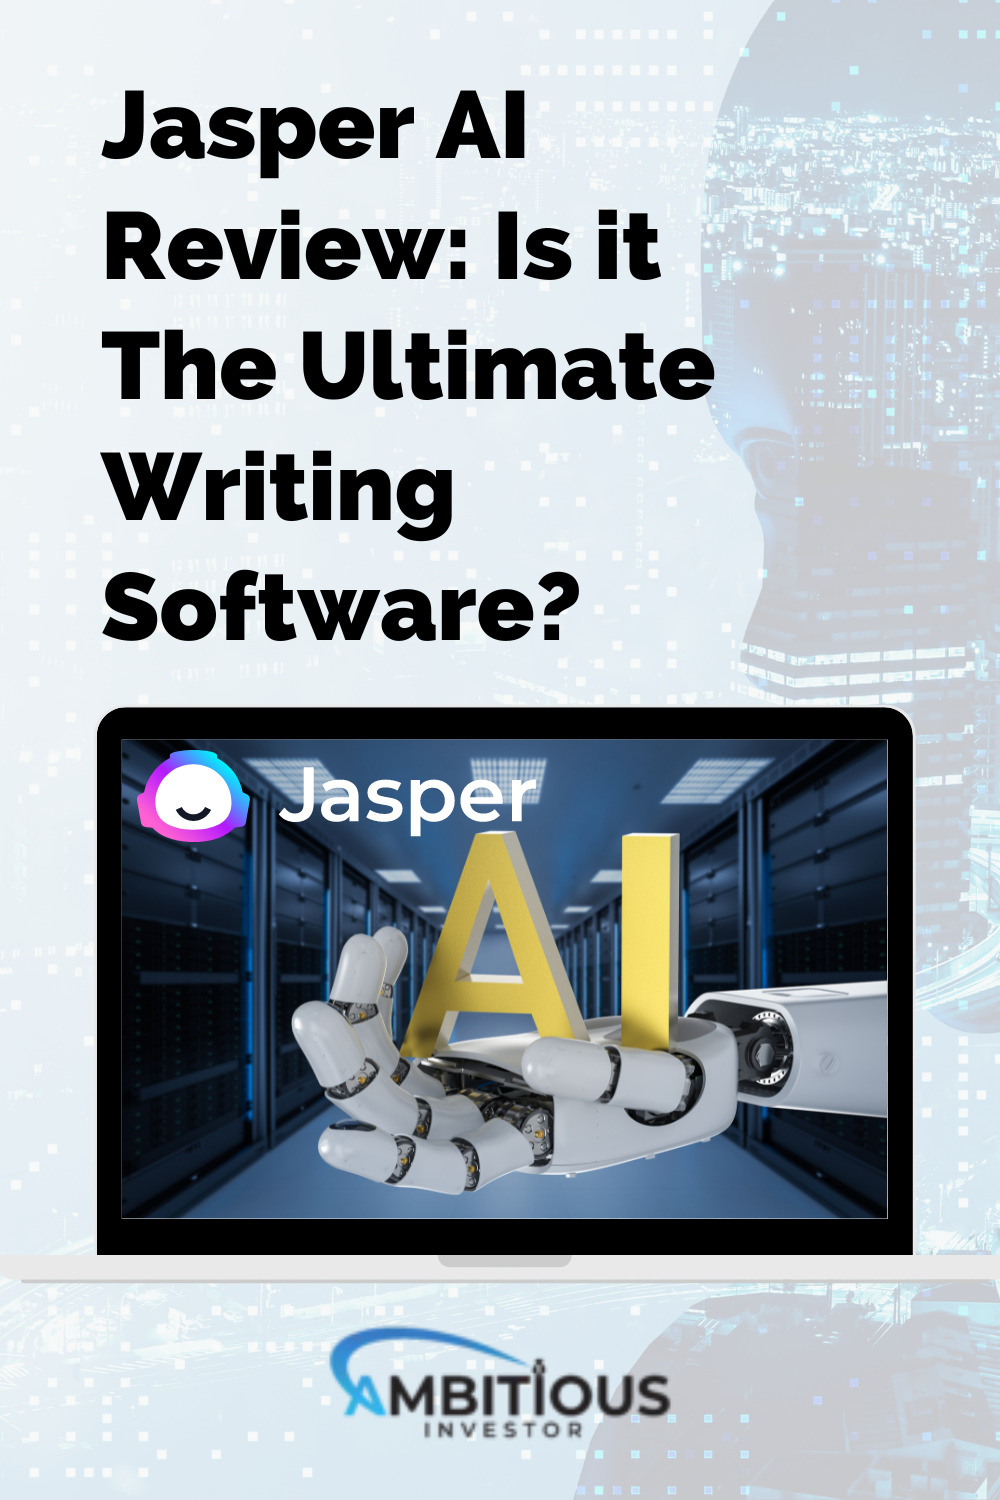 Jasper AI Review – Is it The Ultimate Writing Software? 